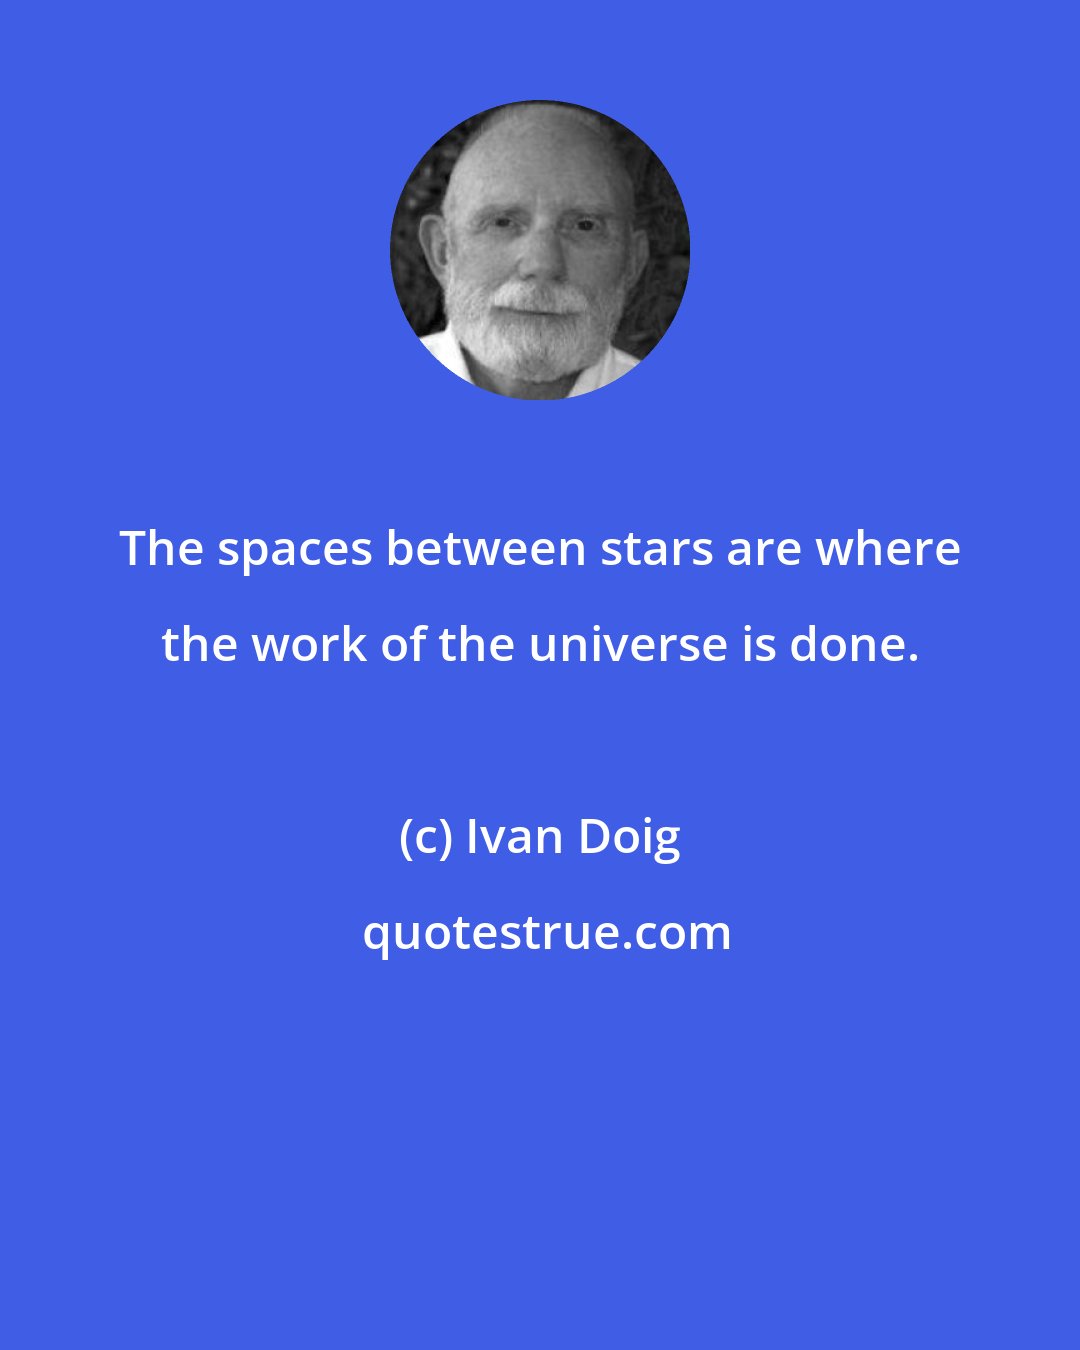 Ivan Doig: The spaces between stars are where the work of the universe is done.